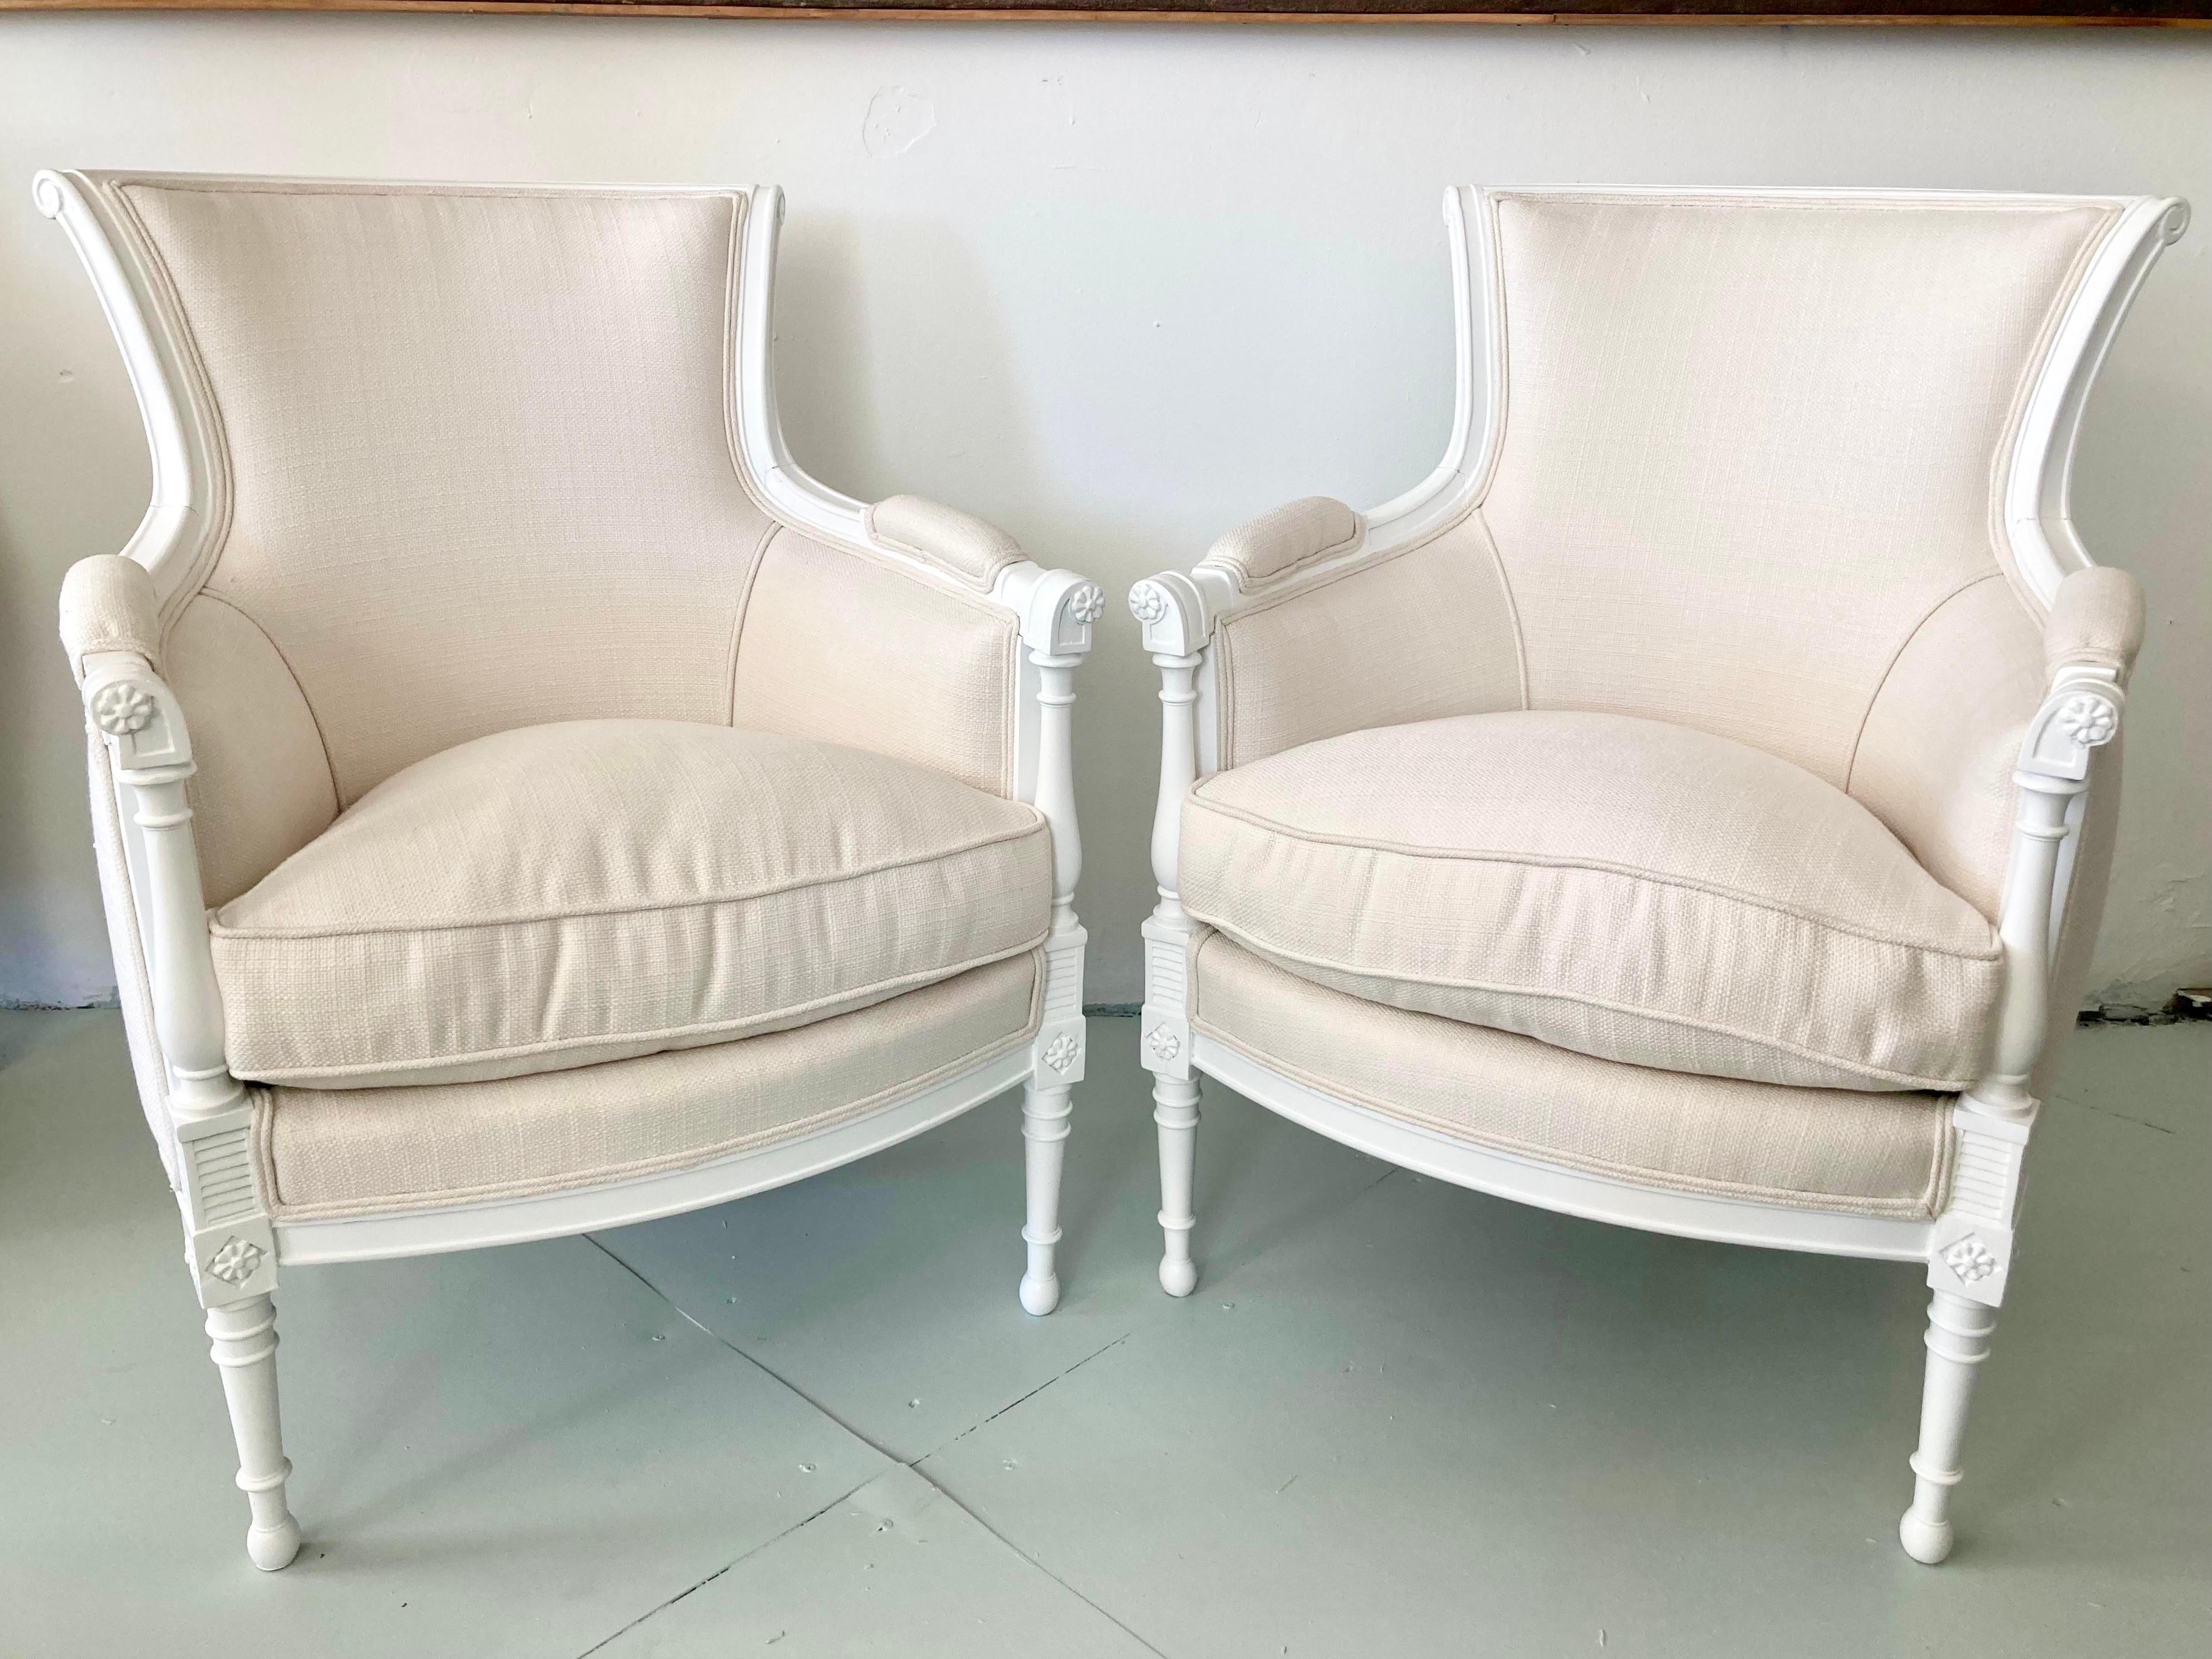 19th Century French Directoire Bergere Chair Fresh White Lacquered Finish, a Pair For Sale